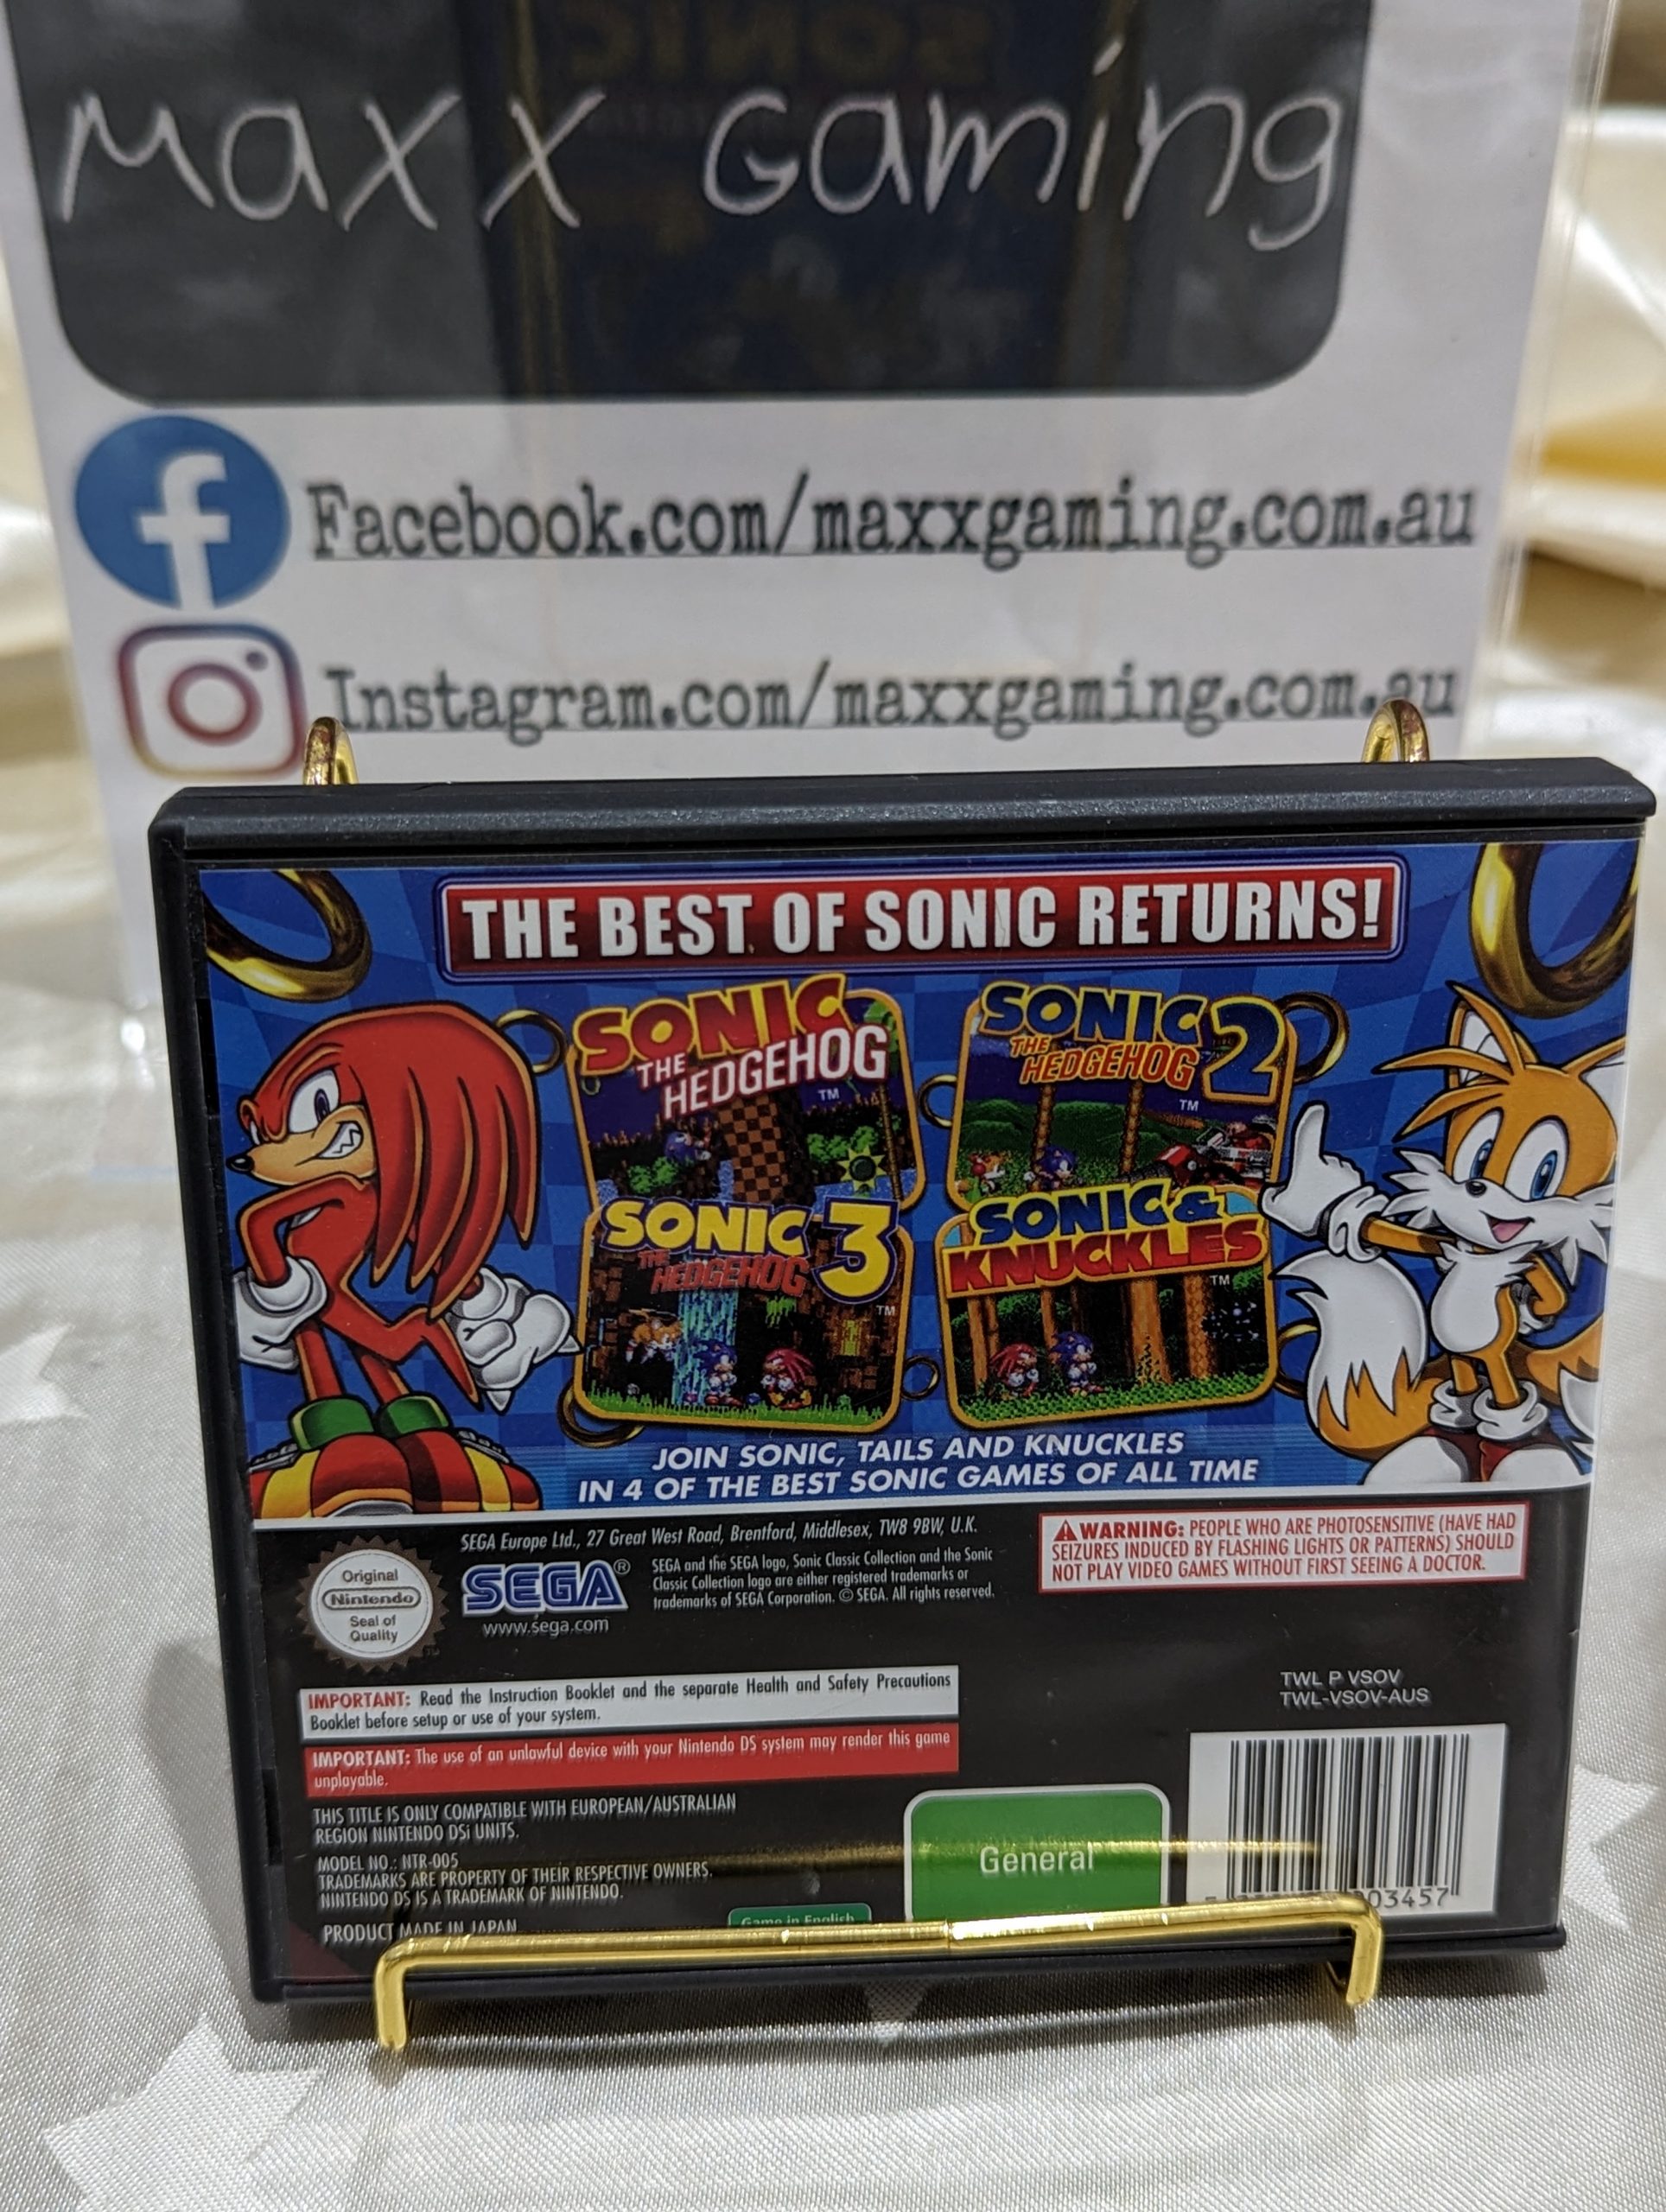 Sonic Classic Collection